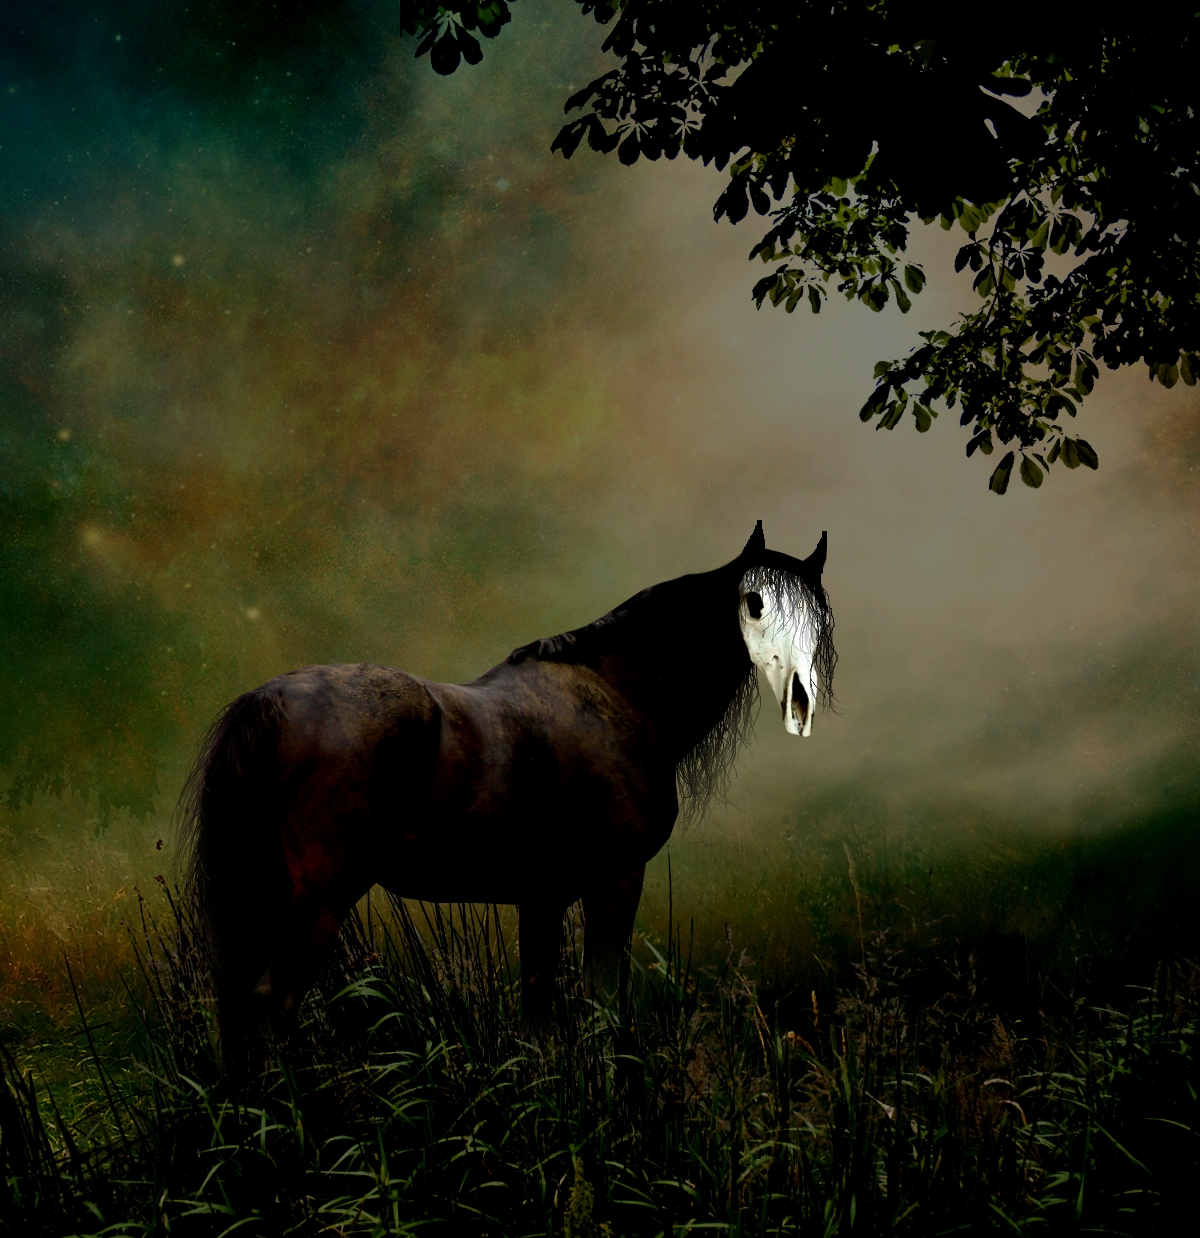 A_Horse_with_no_name____by_Empethy.jpg